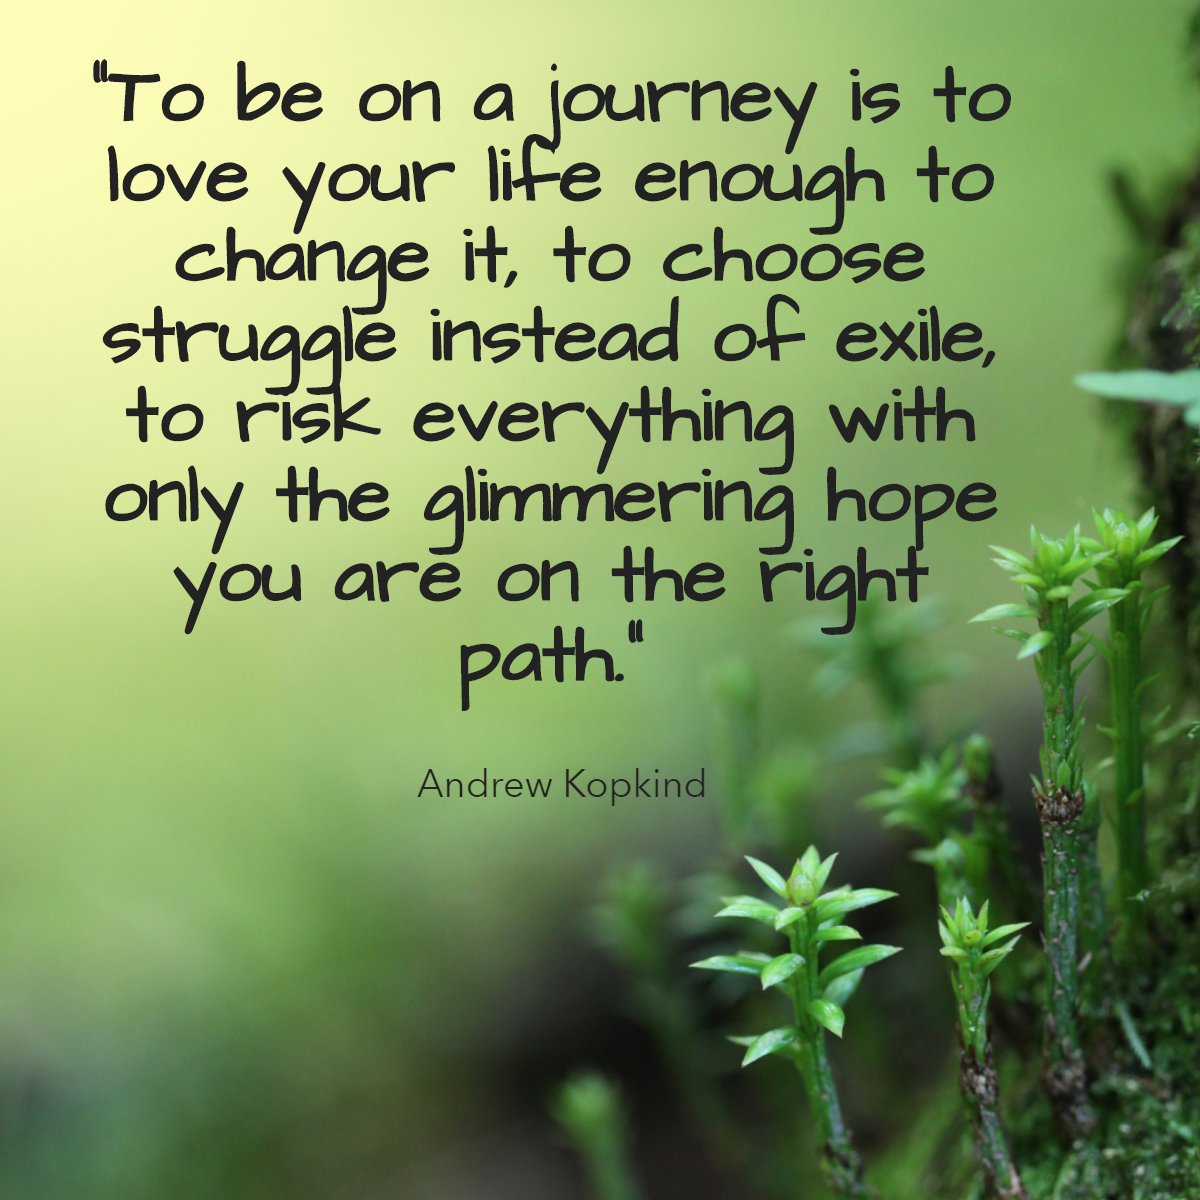 'To be on a journey is to love your life enough to change it, to choose struggle instead of exile, to risk everything with only the glimmering hope you are on the right path.' 
— Andrew Kopkind 🤗

#journey #quotes #wisdom #wisdomquotes #wordsofwisdom #quotestagram